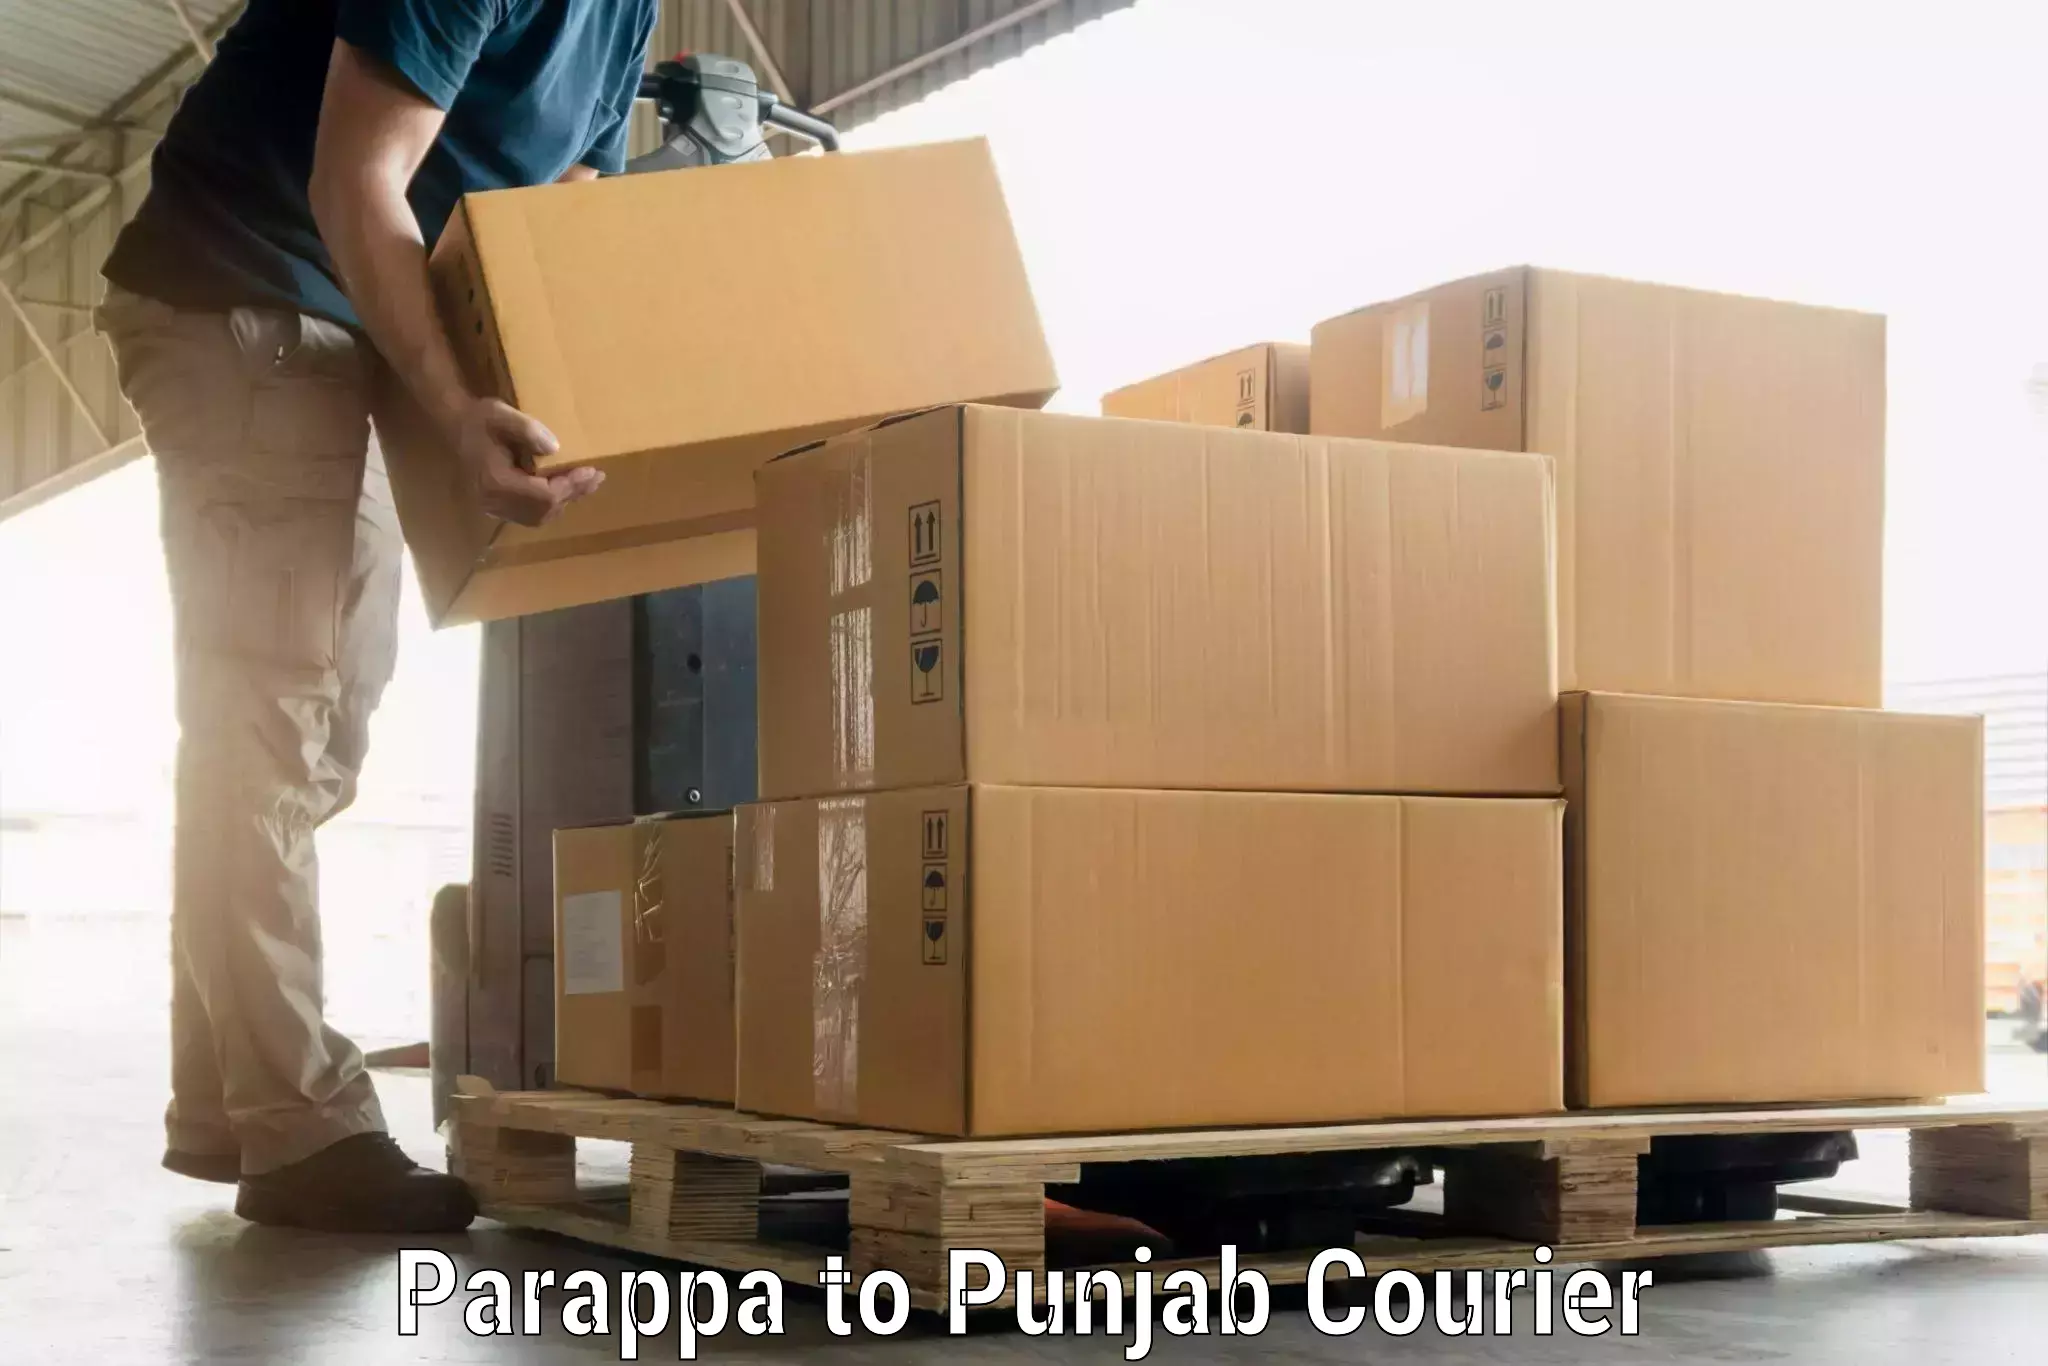 Luggage delivery network Parappa to Punjab